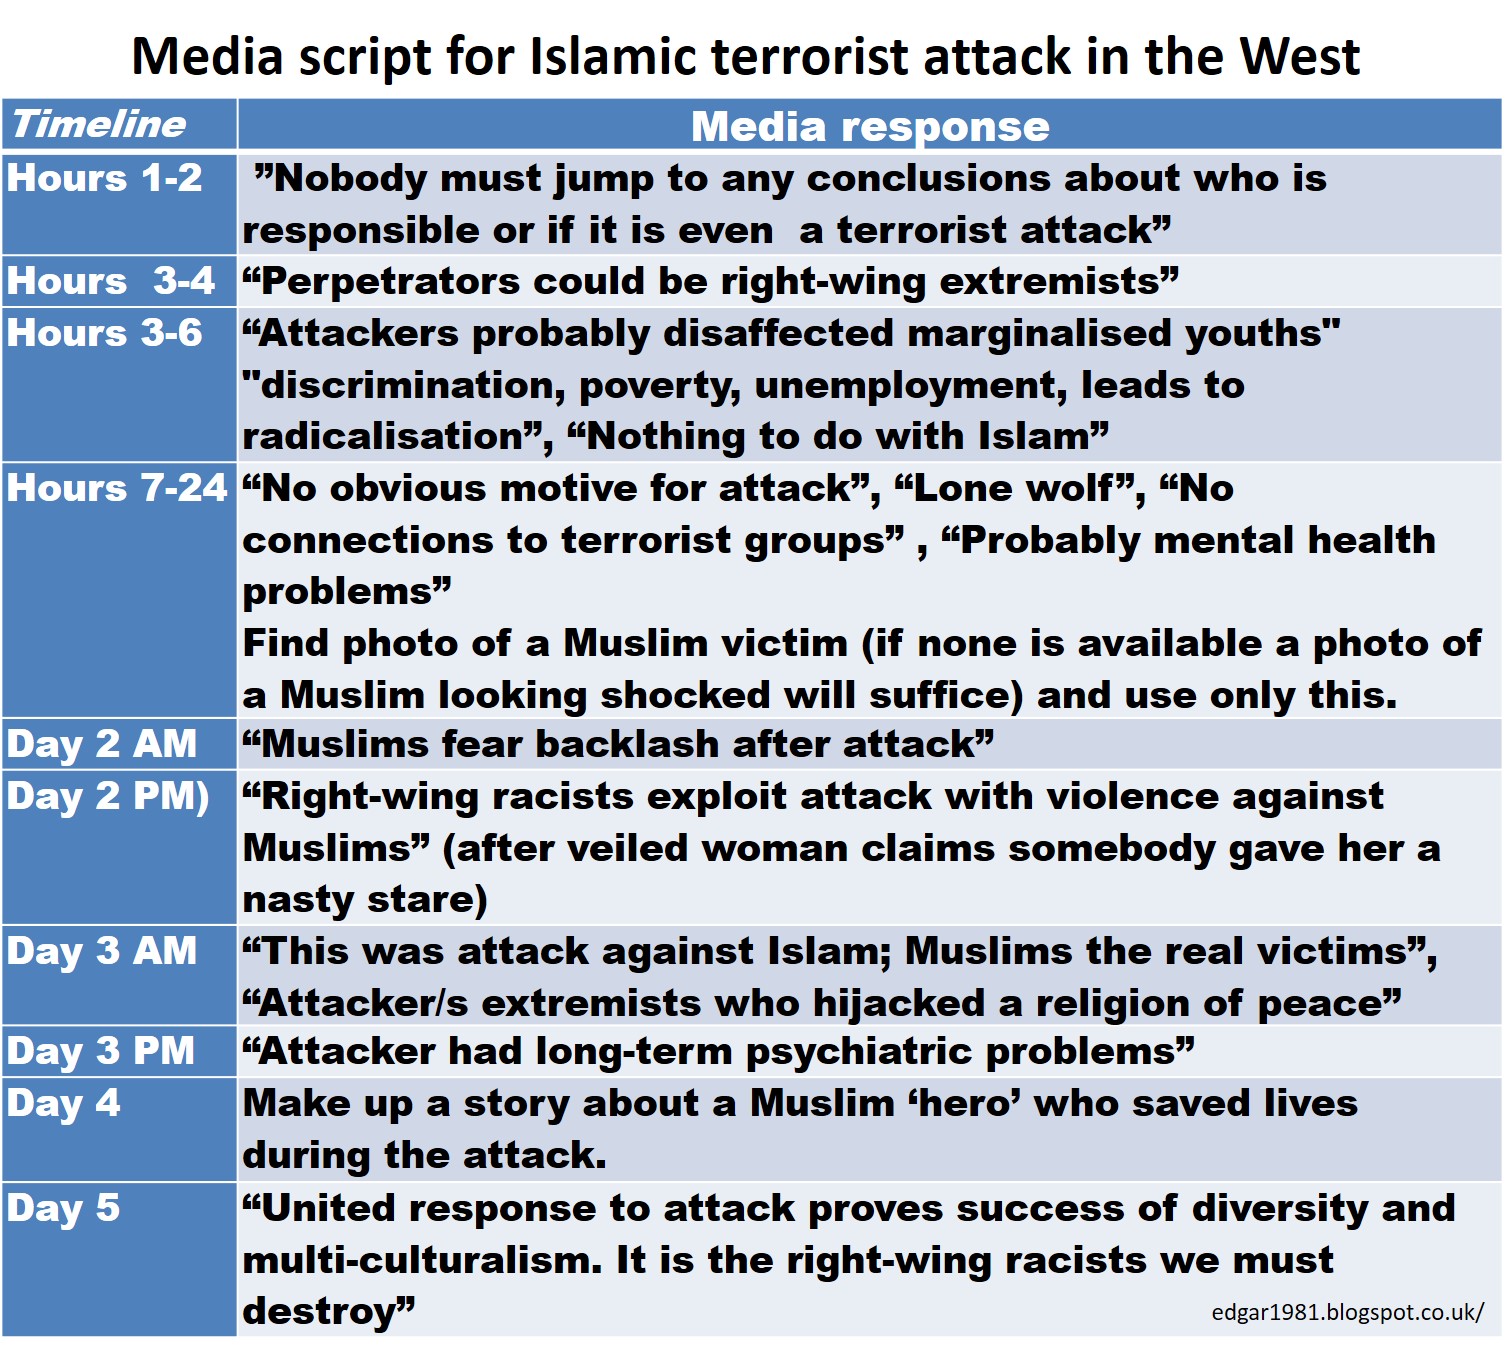 Media script. Muslim about History. Conclusion about Religion. Muslim Heroes. The right to Exploit.